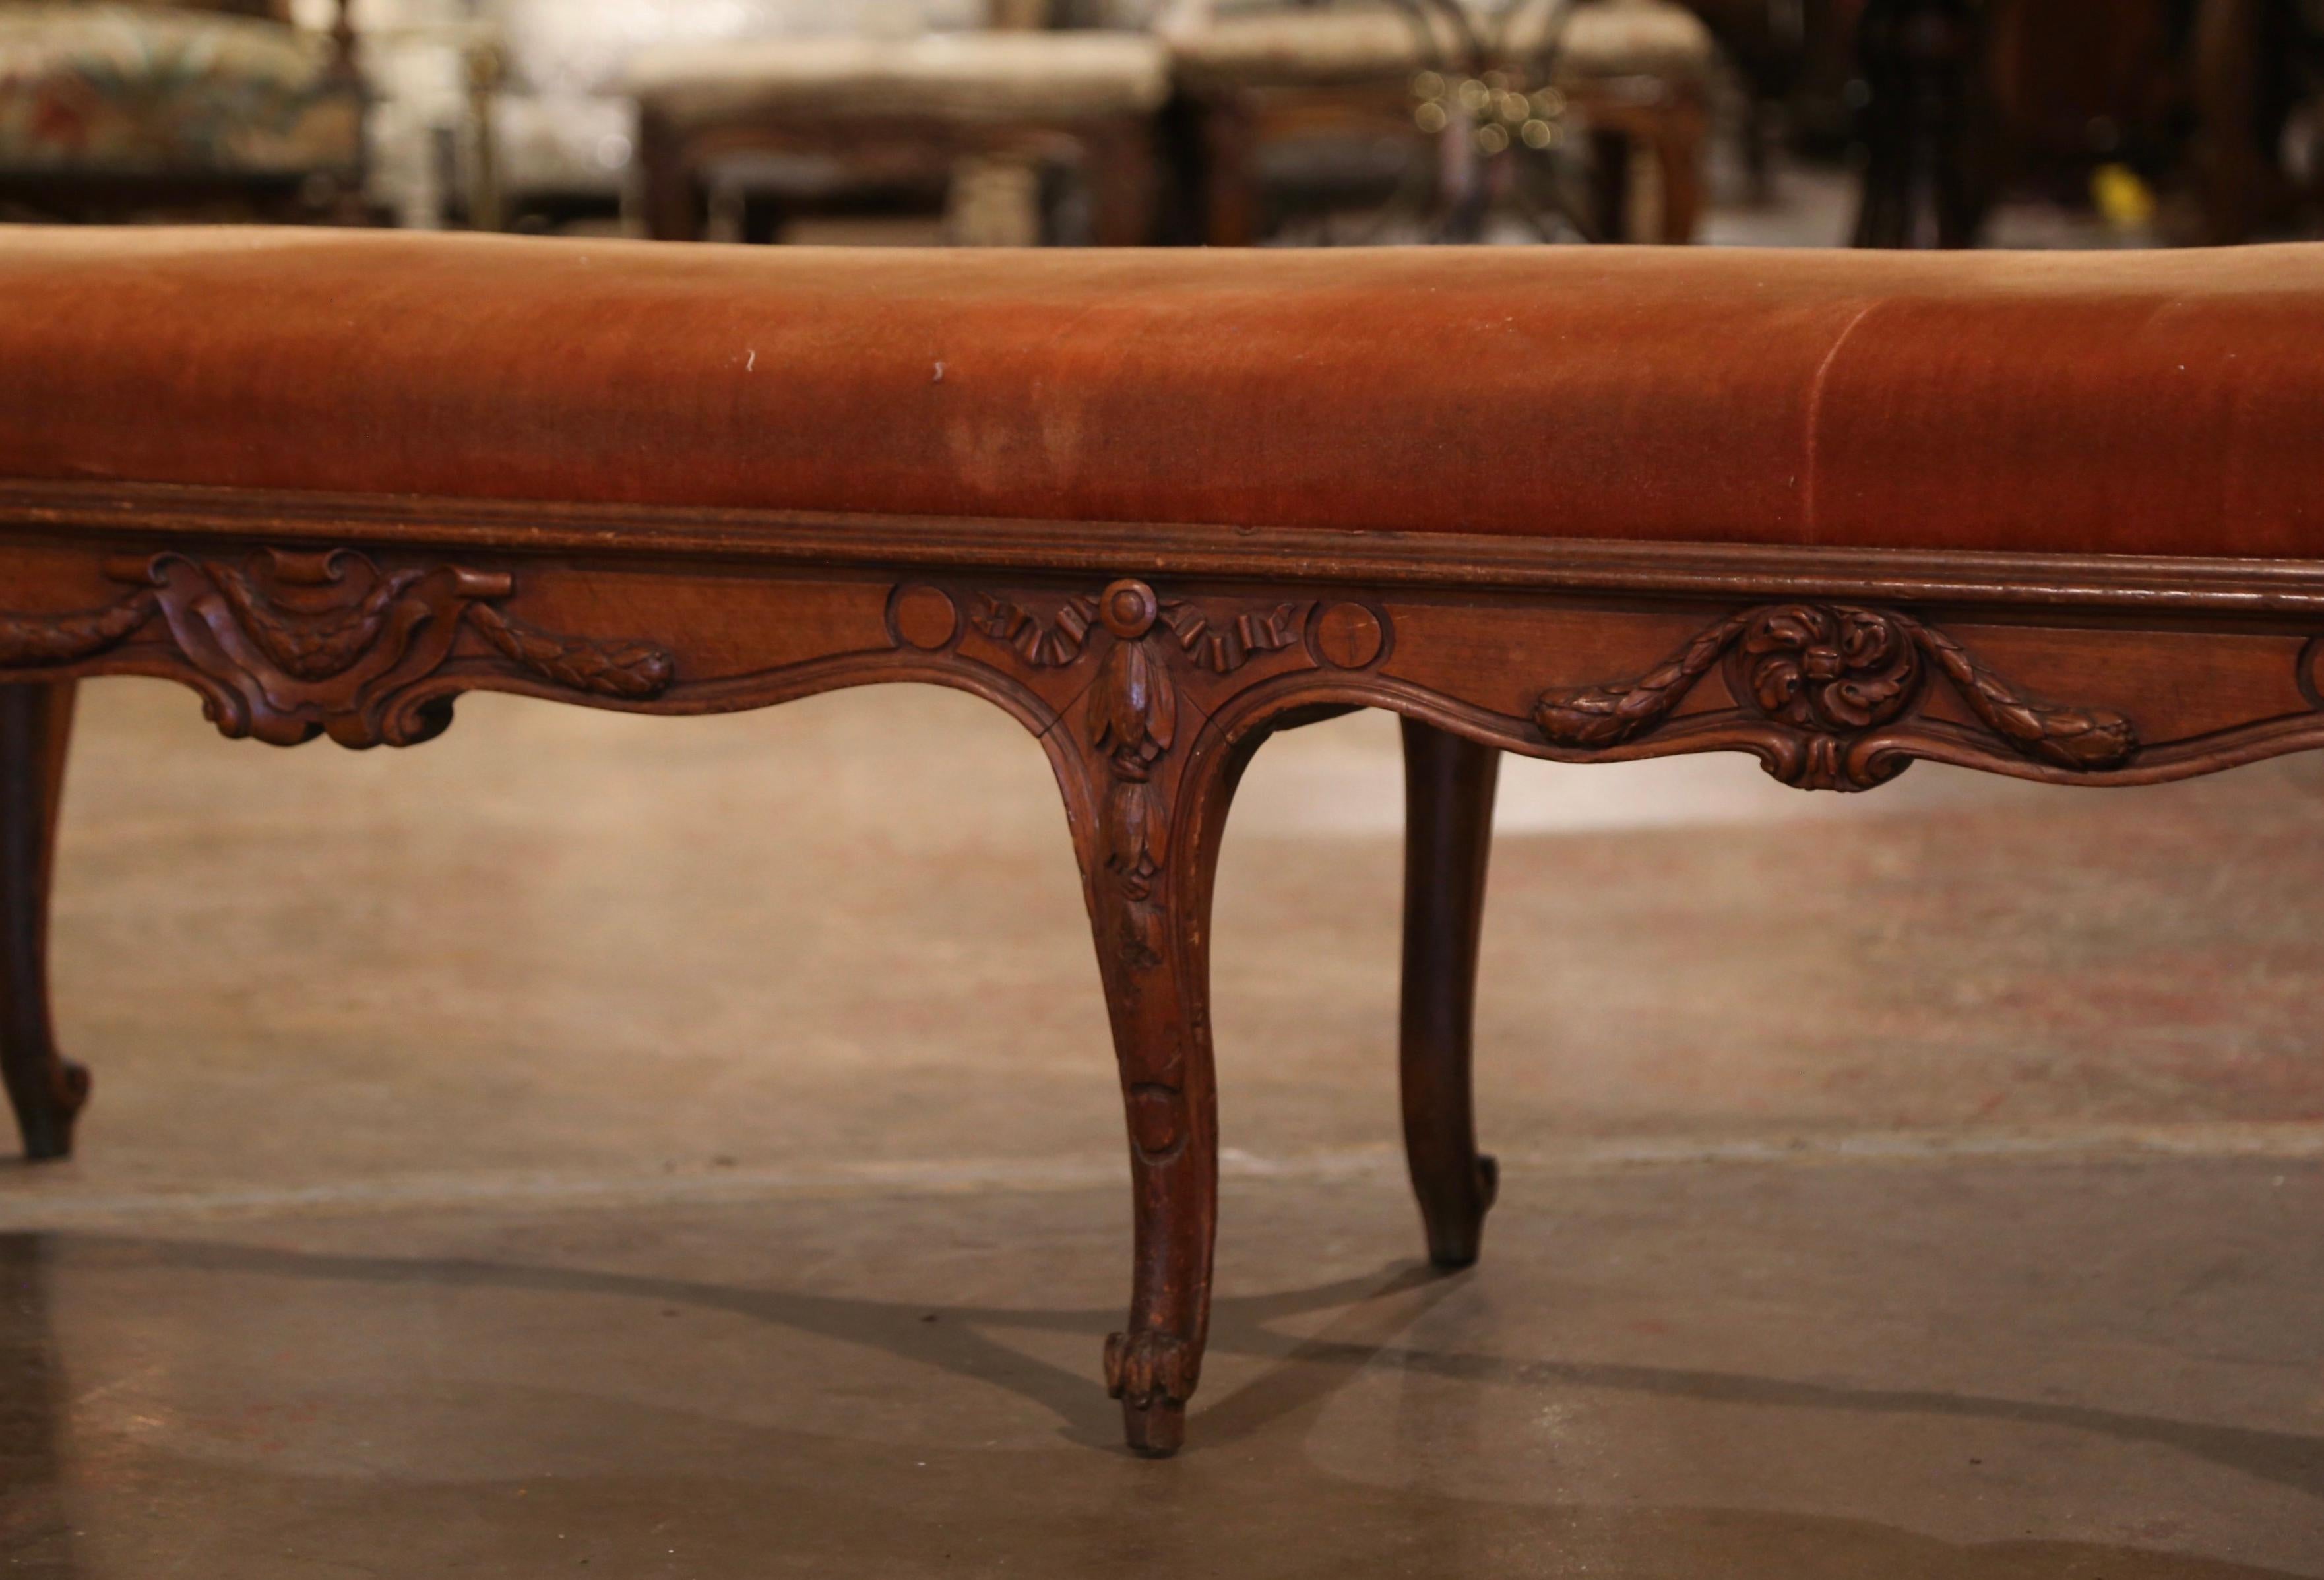 Place this large elegantly carved bench at the foot of a bed, or use it for extra seating in a hallway. Crafted in southern France circa 1880, the antique fruitwood bench stands on eight cabriole legs decorated with leaf motifs at the shoulder and